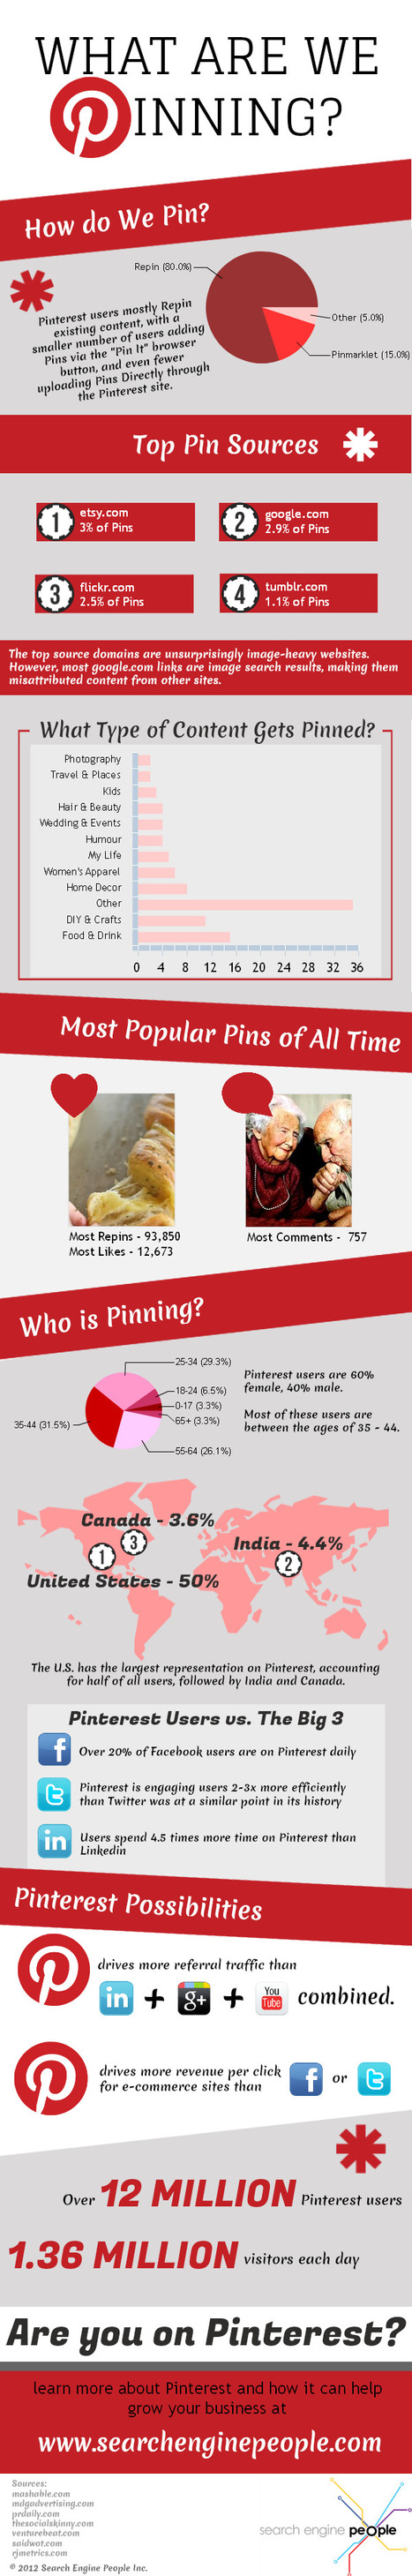 What Are We Pinning? [Infographic] | Education & Numérique | Scoop.it